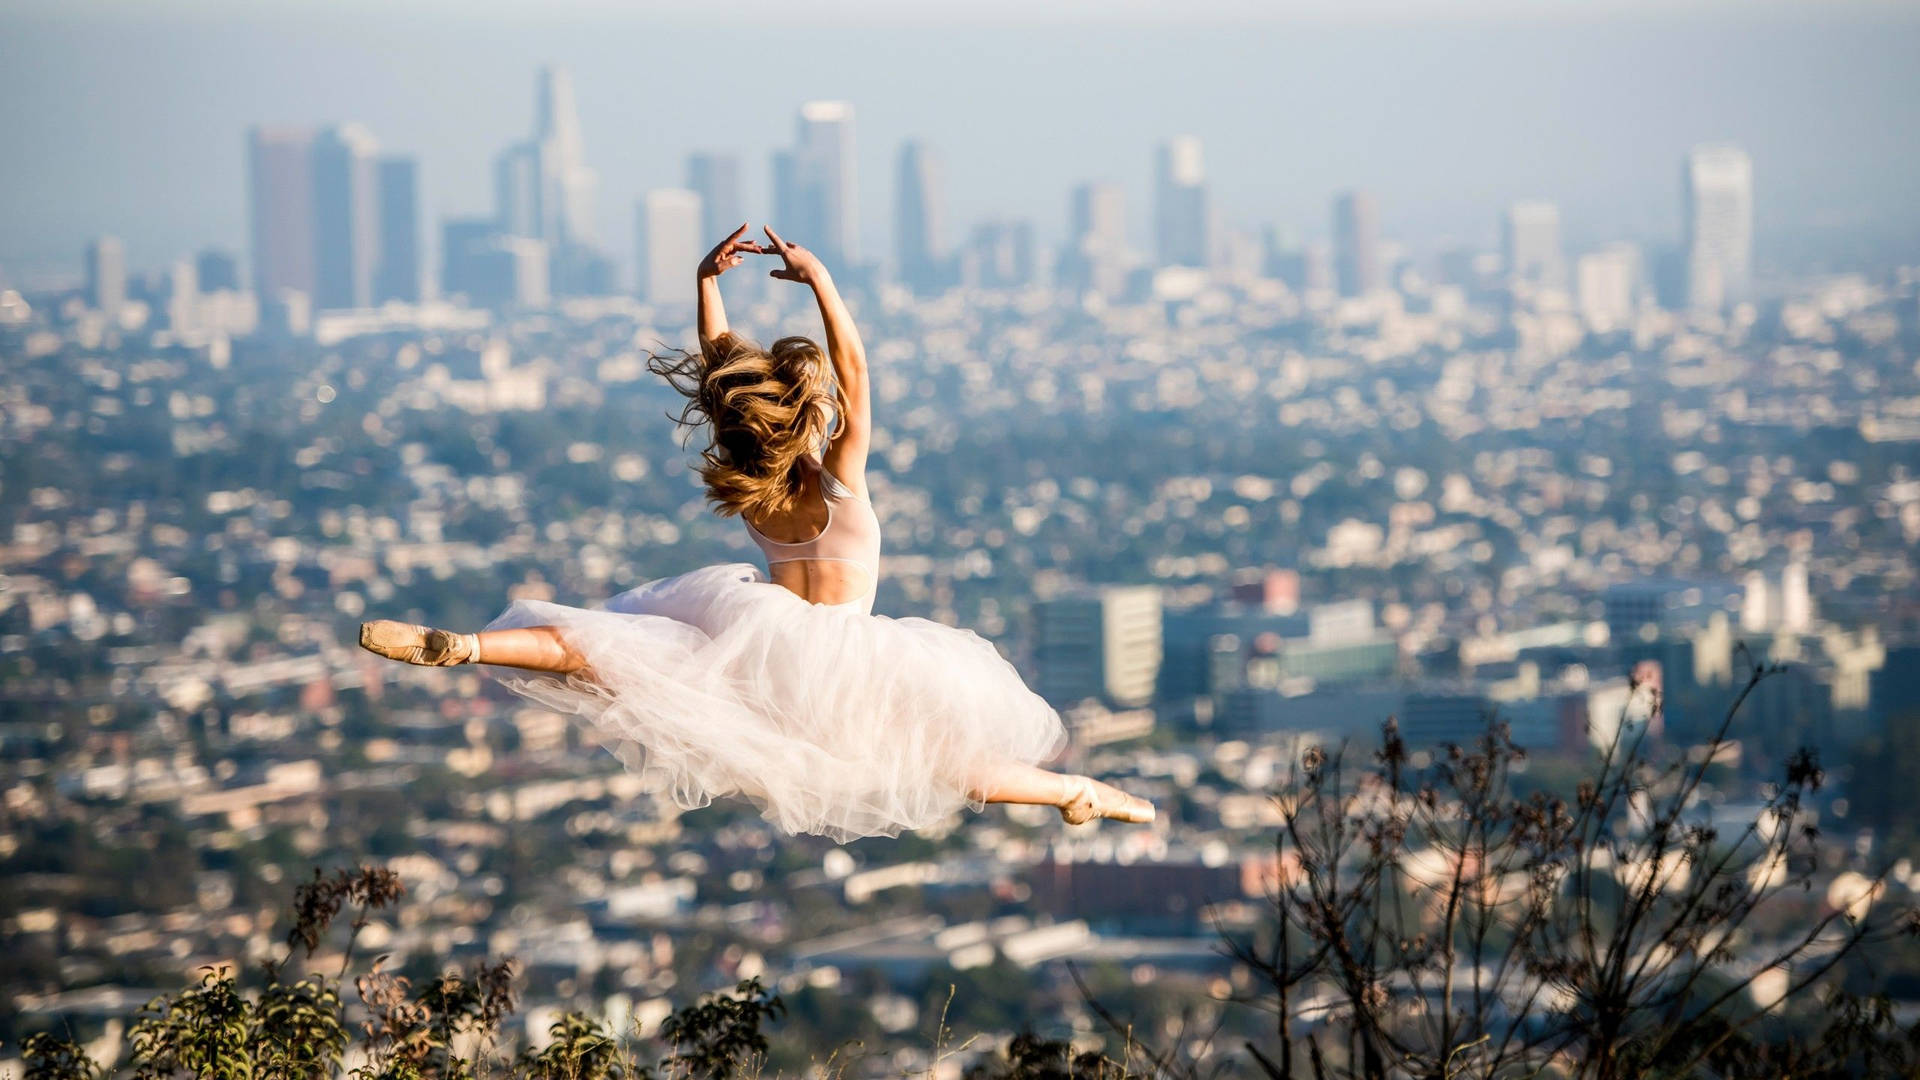 Ballet Dancer With City Overview Background